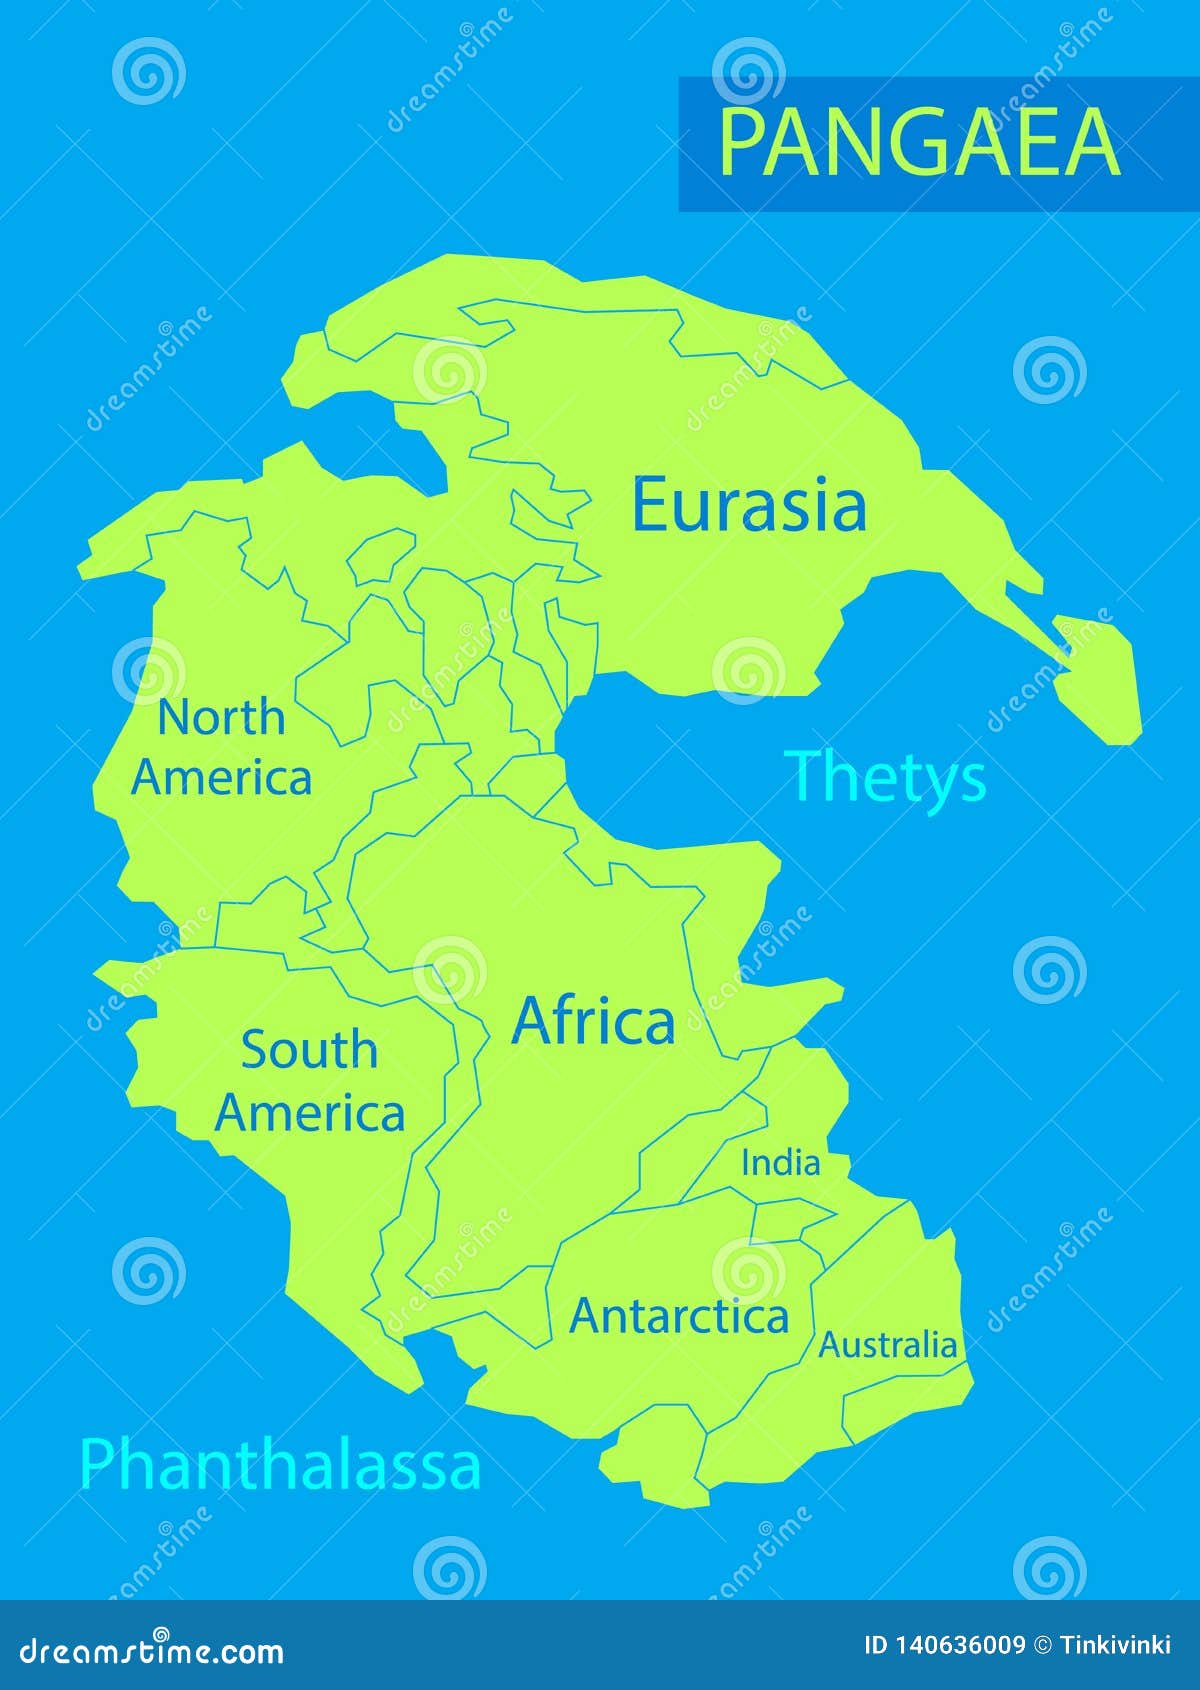 pangaea or pangea.   of supercontinent that existed during the late paleozoic and early mesozoic eras